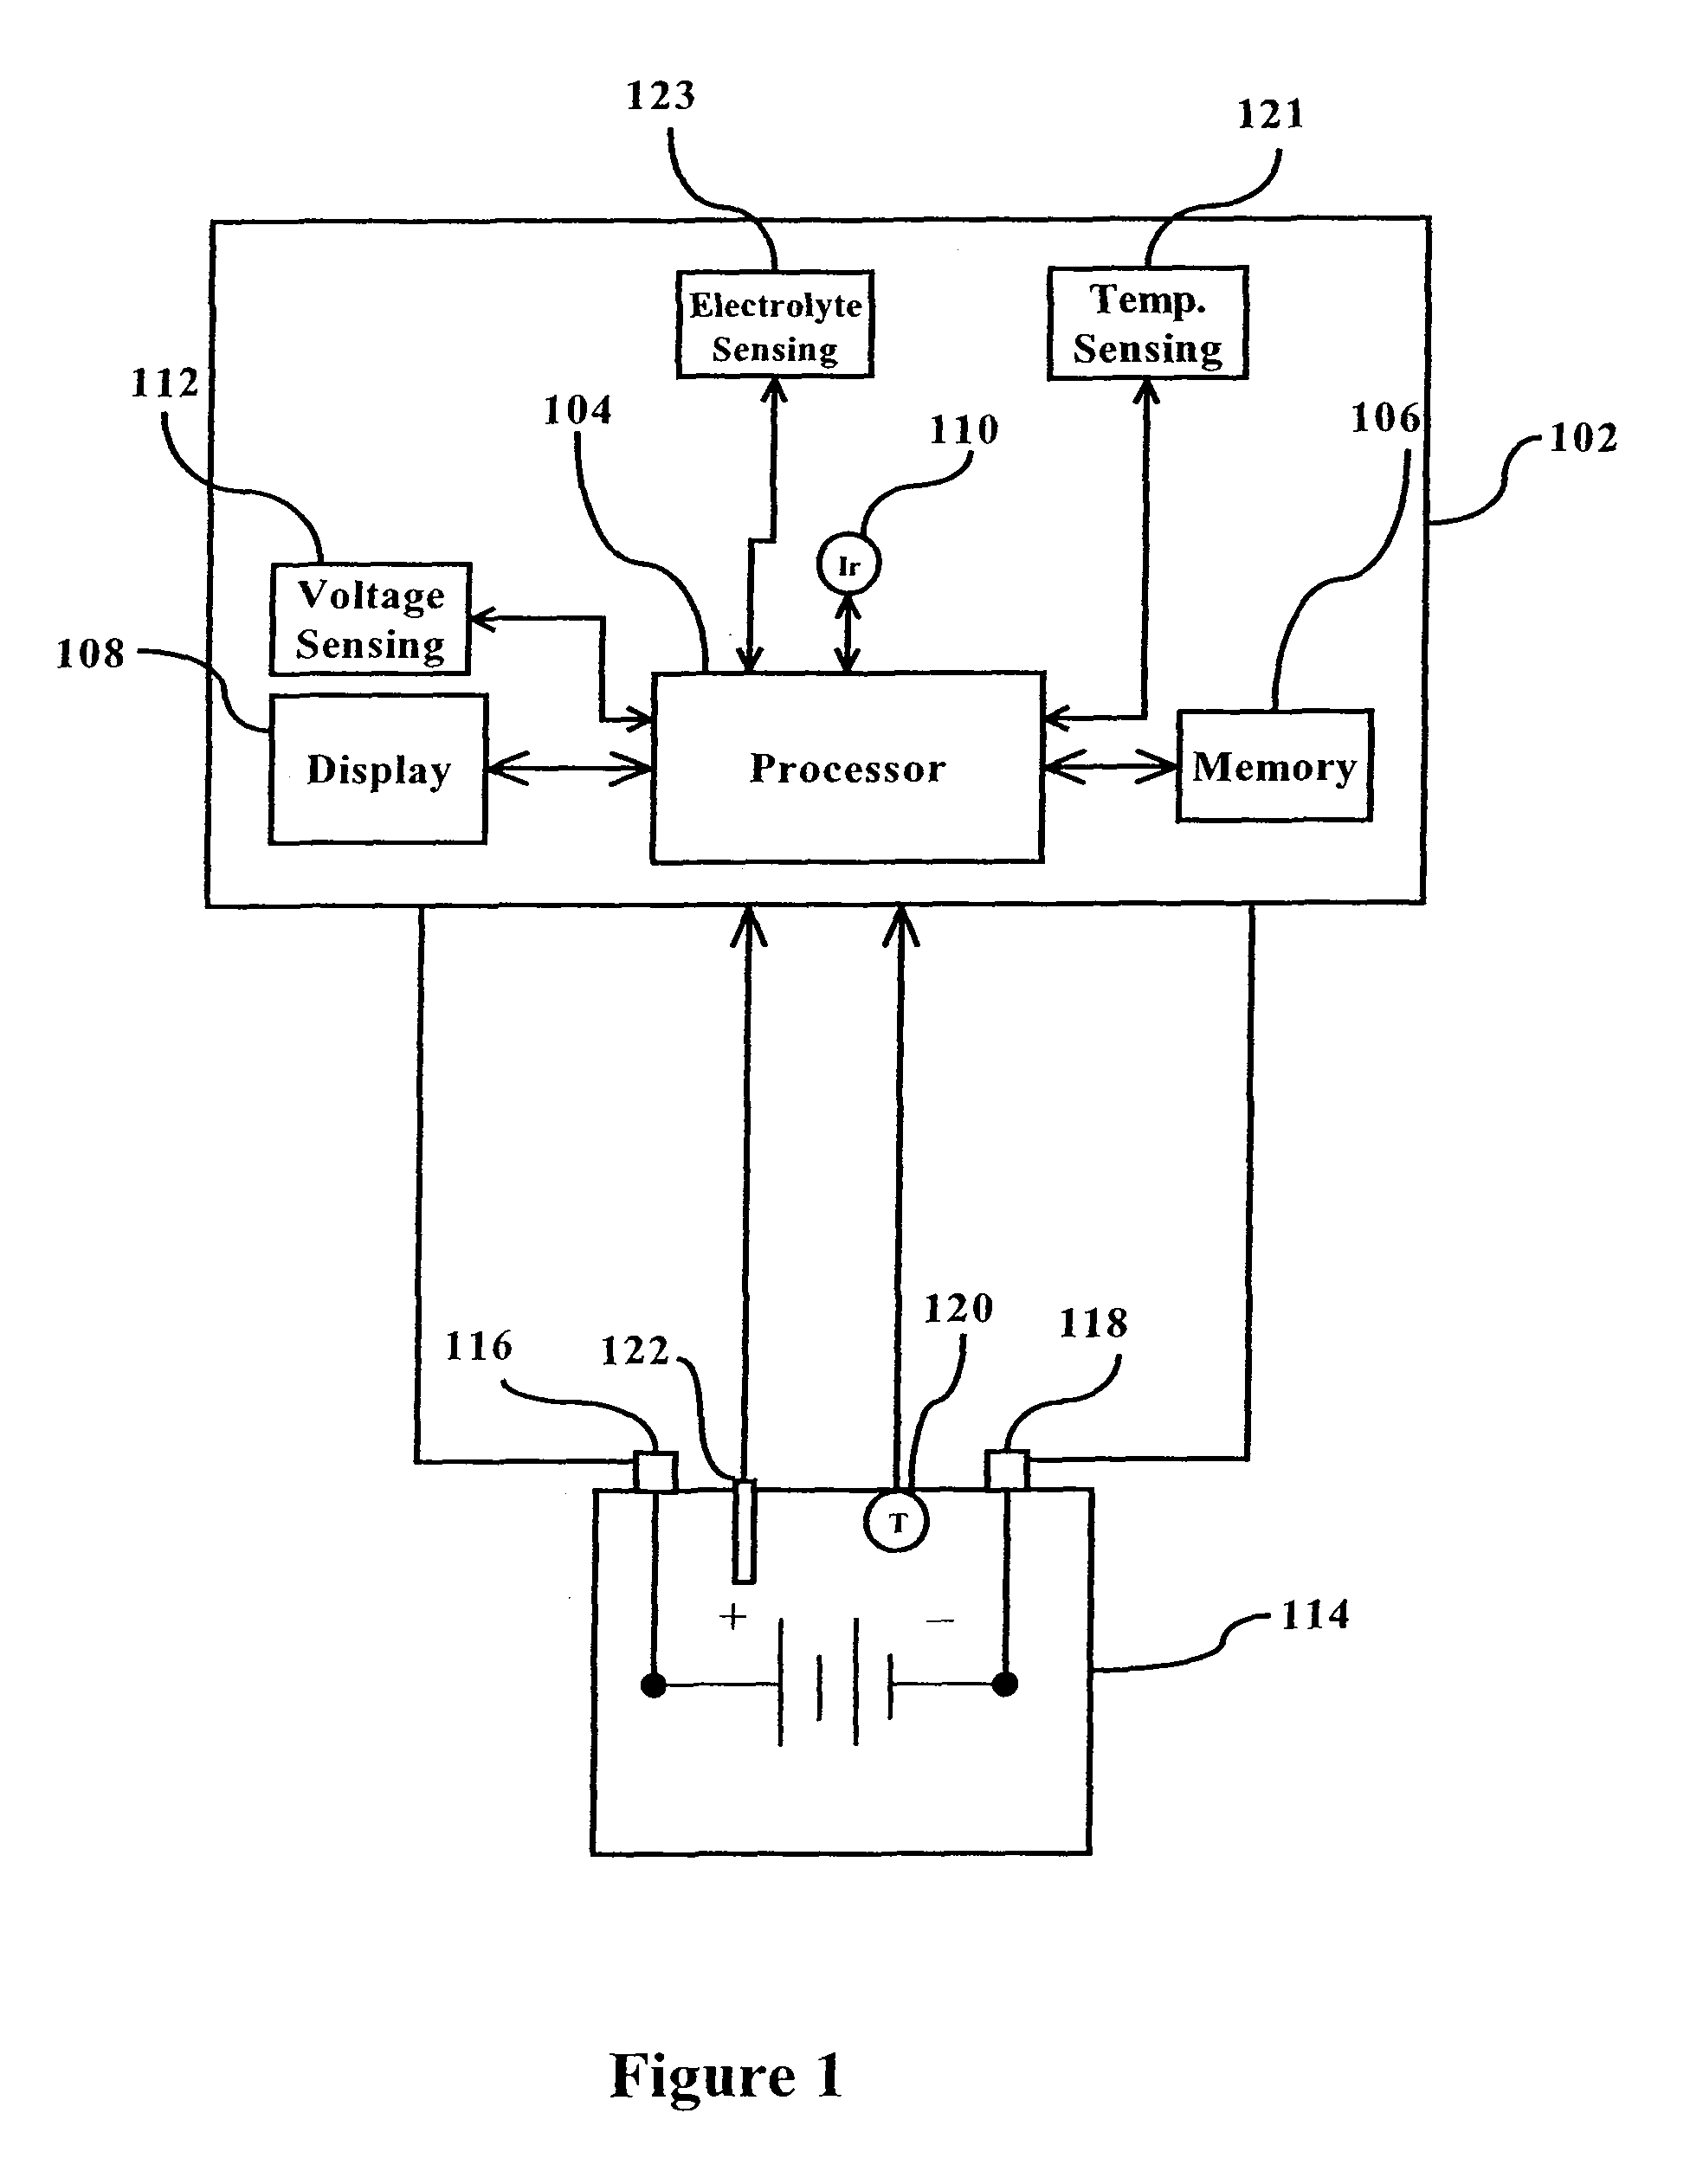 Device and method for monitoring life history and controlling maintenance of industrial batteries